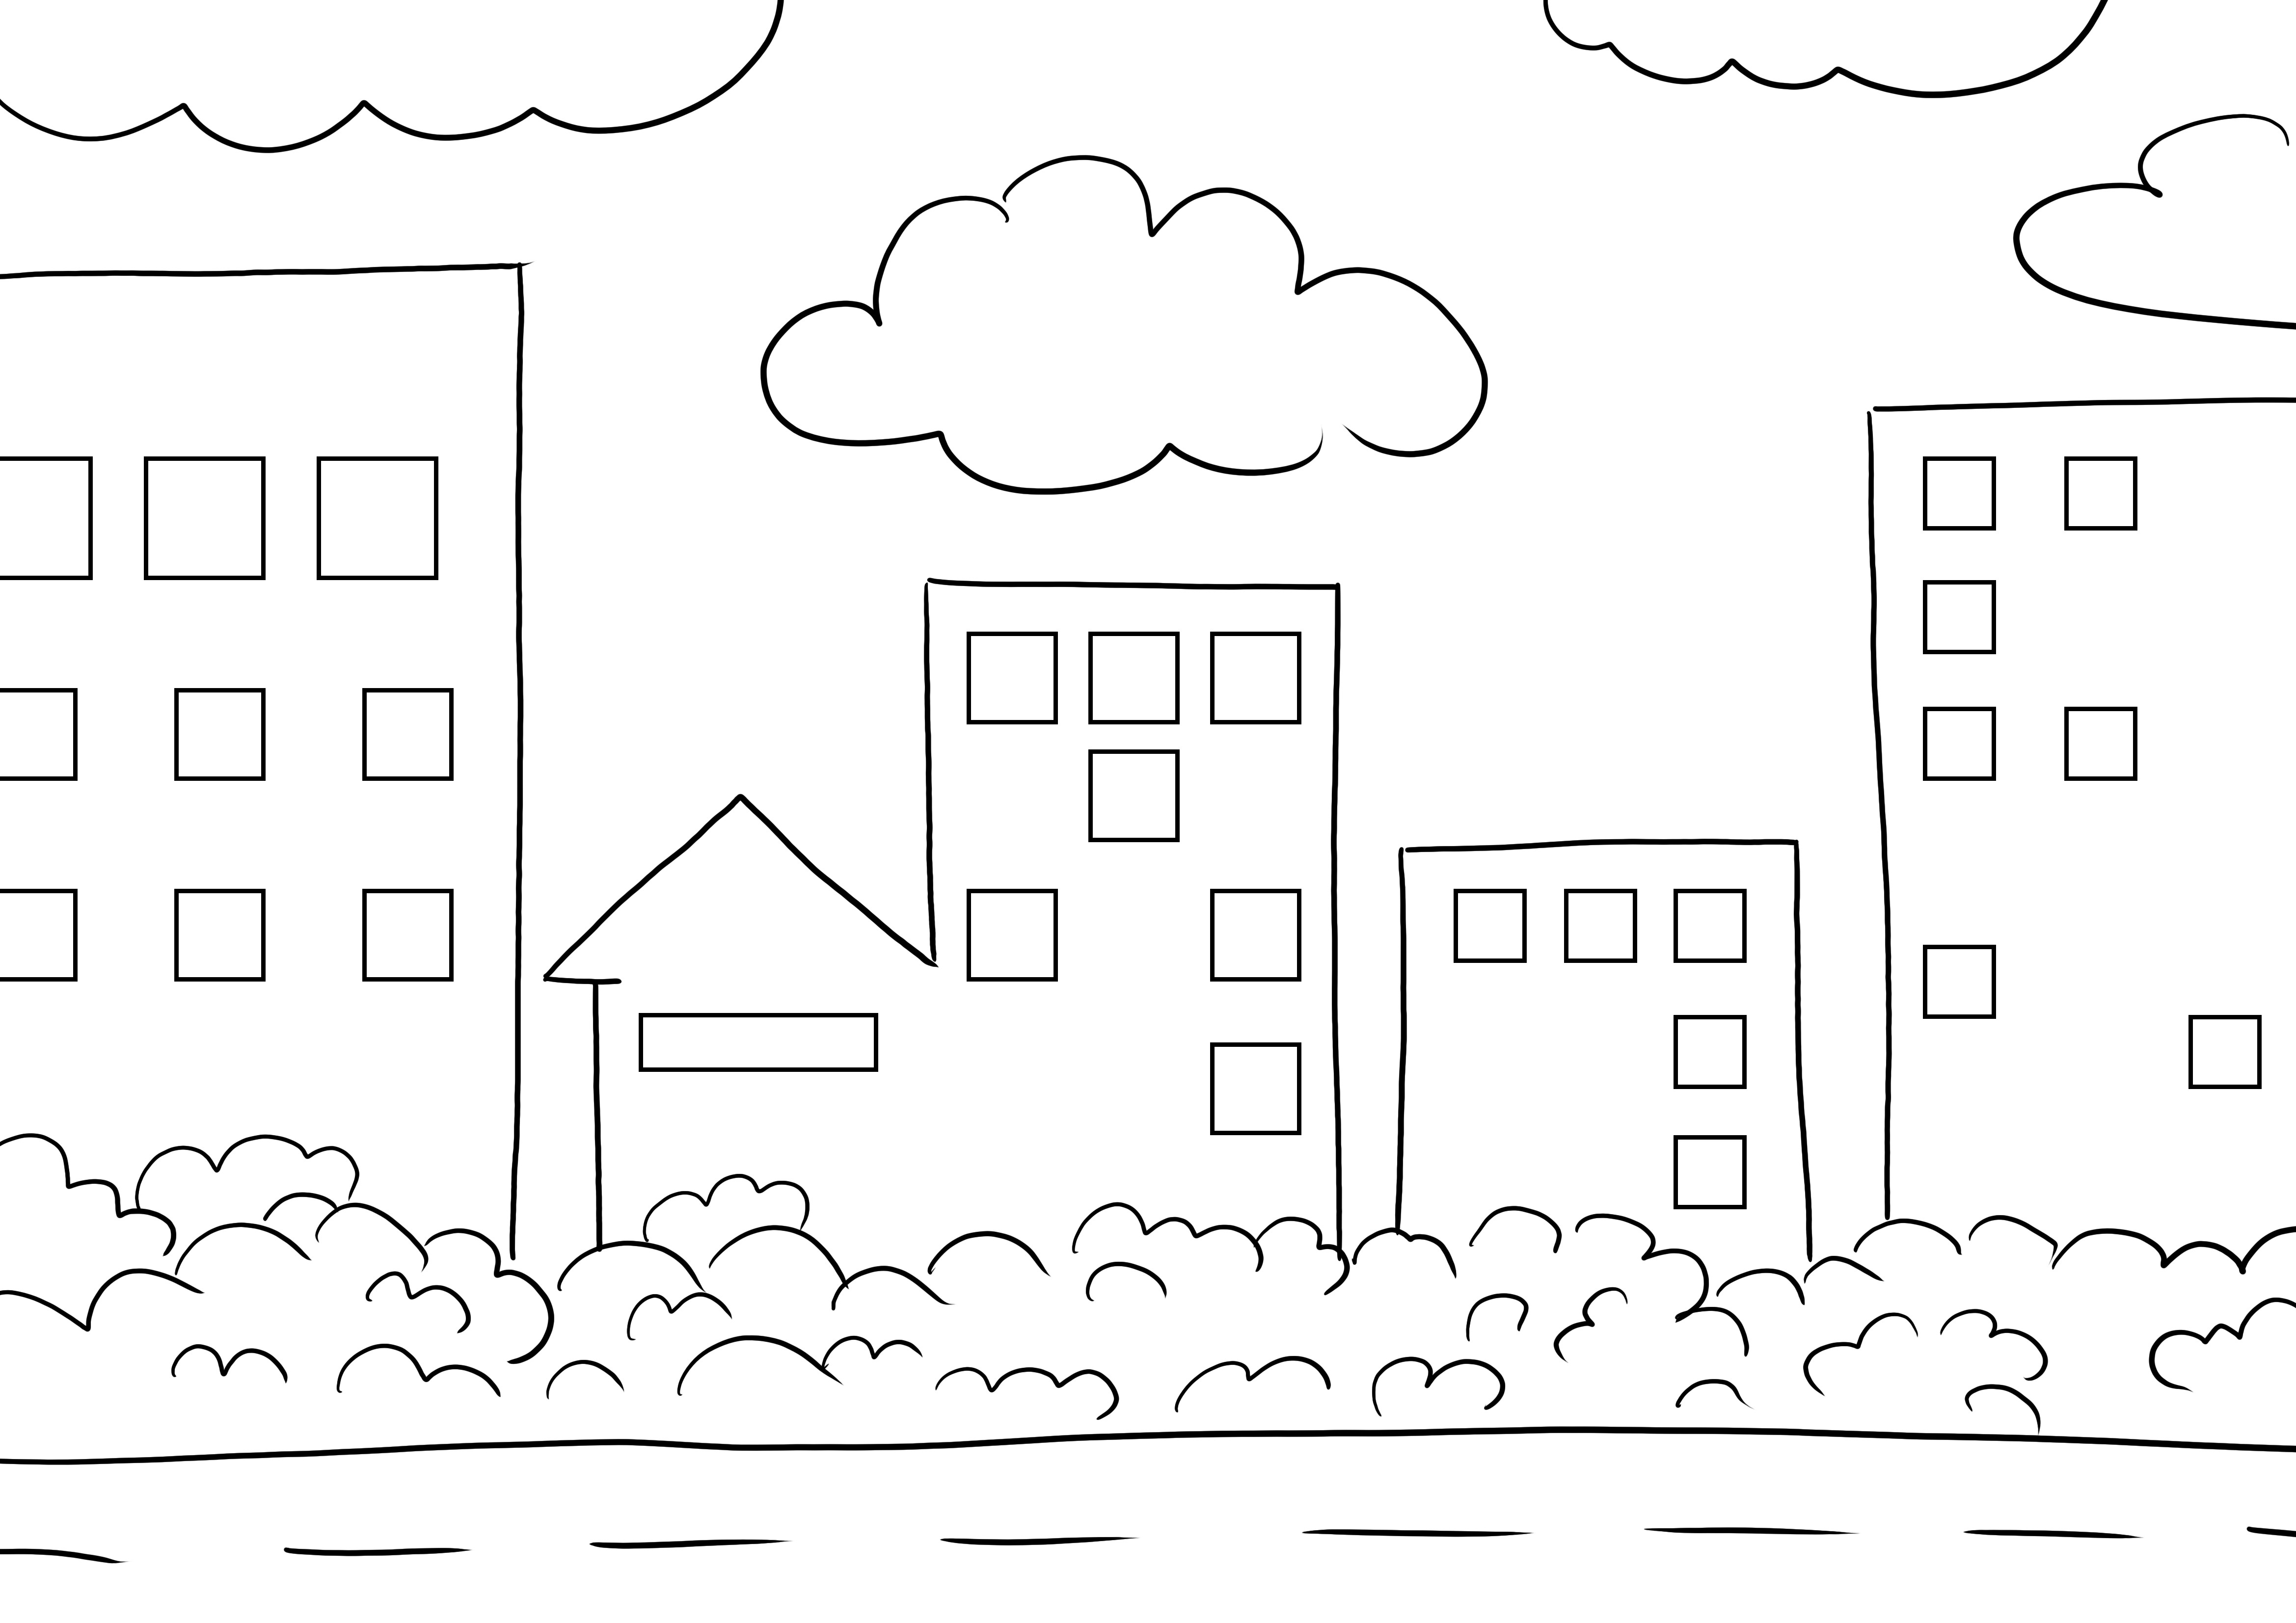 Free City building blocks for coloring and downloading image